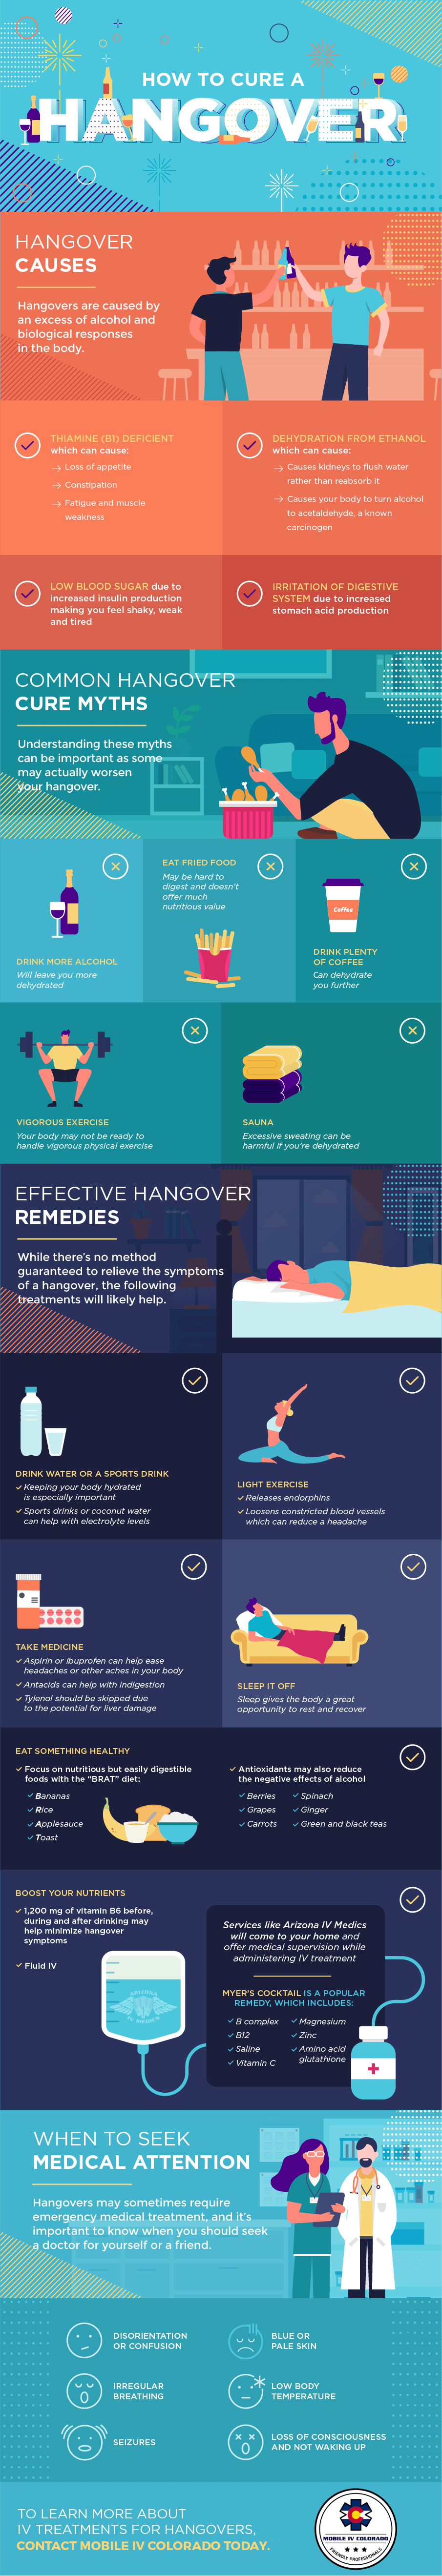 How to cure a hangover fast: Doctor-approved remedies